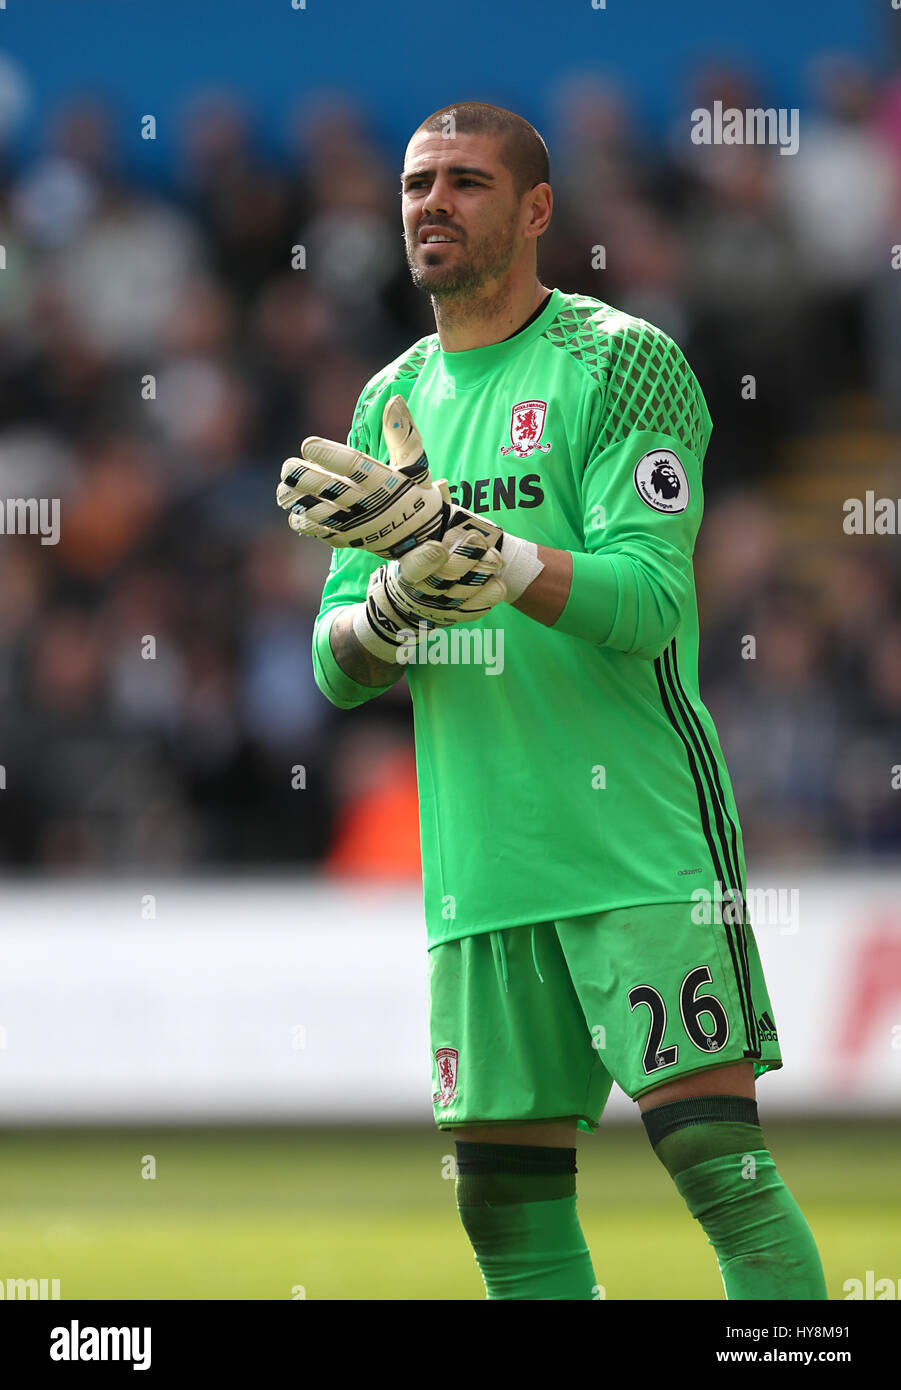 Middlesbrough goalkeeper Victor Valdes during the Premier League match at the Liberty Stadium, Swansea. PRESS ASSOCIATION Photo. Picture date: Sunday April 2, 2017. See PA story SOCCER Swansea. Photo credit should read: David Davies/PA Wire. RESTRICTIONS: EDITORIAL USE ONLY No use with unauthorised audio, video, data, fixture lists, club/league logos or 'live' services. Online in-match use limited to 75 images, no video emulation. No use in betting, games or single club/league/player publications. Stock Photo